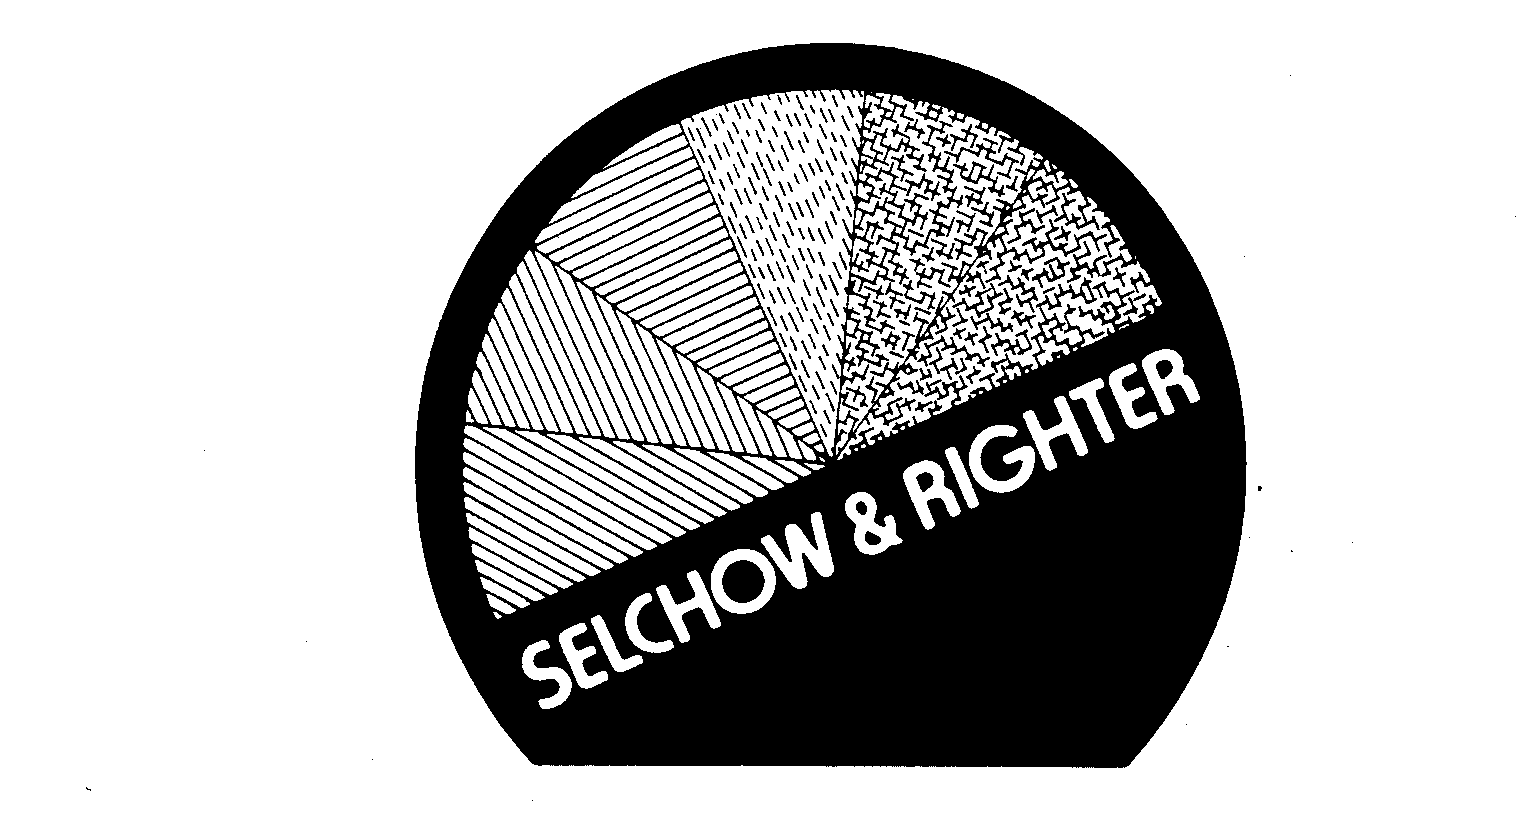  SELCHOW &amp; RIGHTER